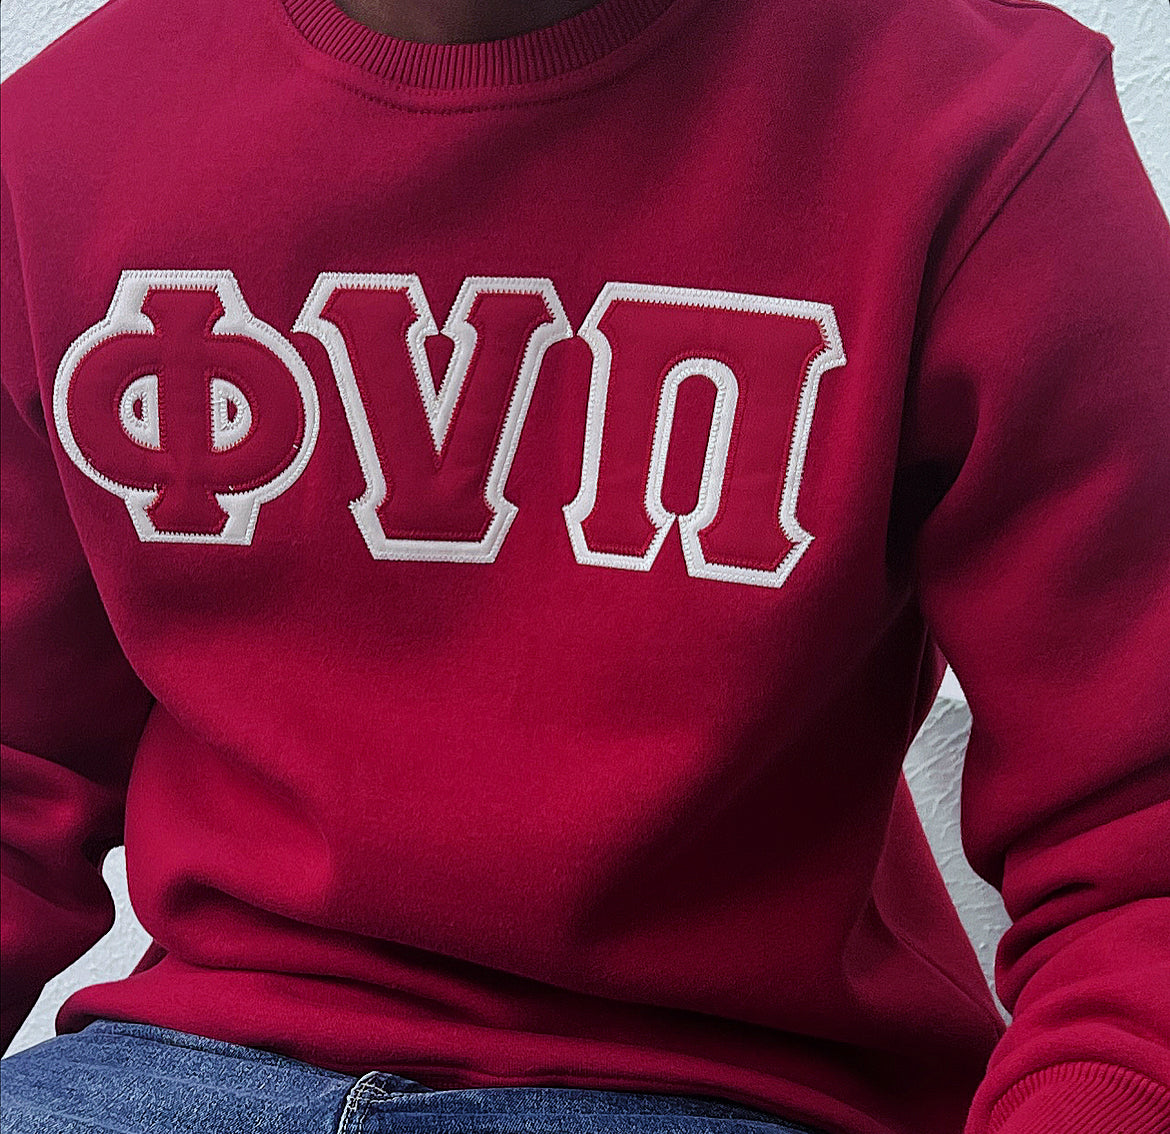 This Kappa Alpha Psi sweatshirt is perfect for anyone in Fraternity organizations. The design features the emblematic "Phi Nu Pi" letters in bold, making it a great addition to any collection of historical memorabilia. 

The sweatshirt is perfect for any occasion, whether it is for a casual event or a special occasion. It is made with high-quality materials to provide comfort and durability. Get this Fraternity collectible and show off your pride for Kappa Alpha Psi.